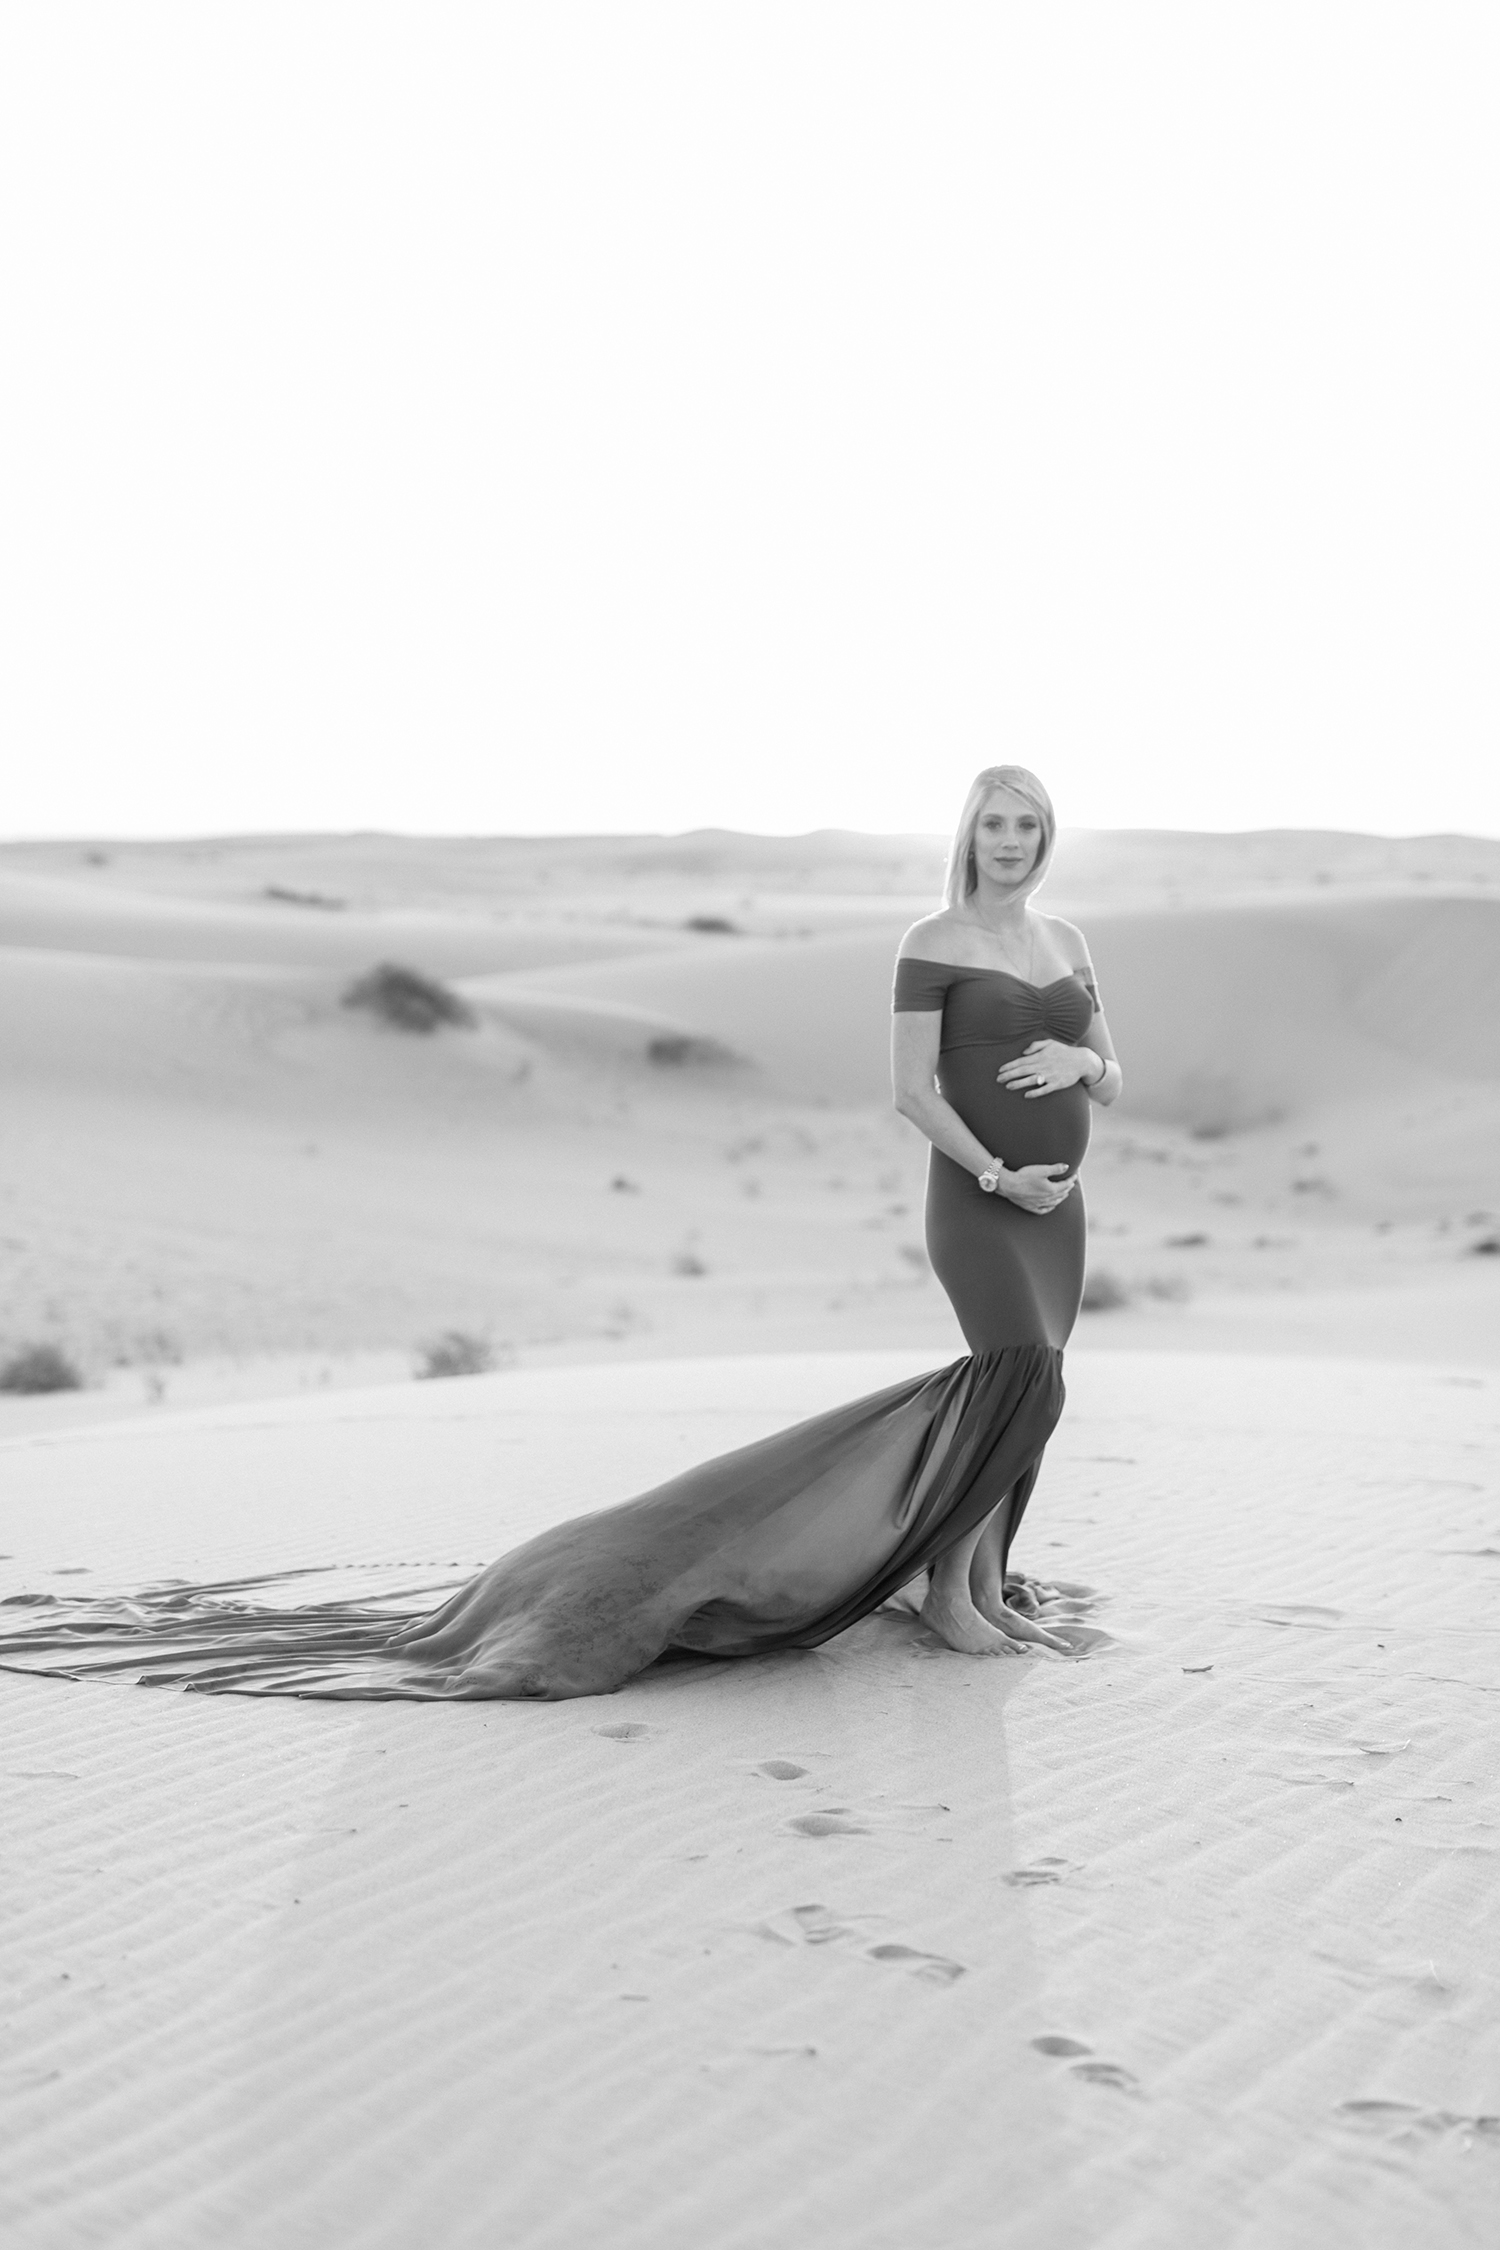 A stunning maternity portrait shoot in the beautiful Glamis Sand Dunes in California. More on the on the blog! #MaternityPhotography #MaternityPictures #MaternityPhotographyPoses #MaternityPhotographyIdeas #MaternityOutfits #MaternityDresses #MaternityPortraits #MaternityDesertPhotoshoot #MaternitySandDunes #CaliforniaMaternityStyle #BumpPhotoshoot #BumPhotoshootIdeas #CaliforniaPhotographer #GlamisSandDunes #GlamisSandDunesPhotoShoot #CaliforniaPhotographer